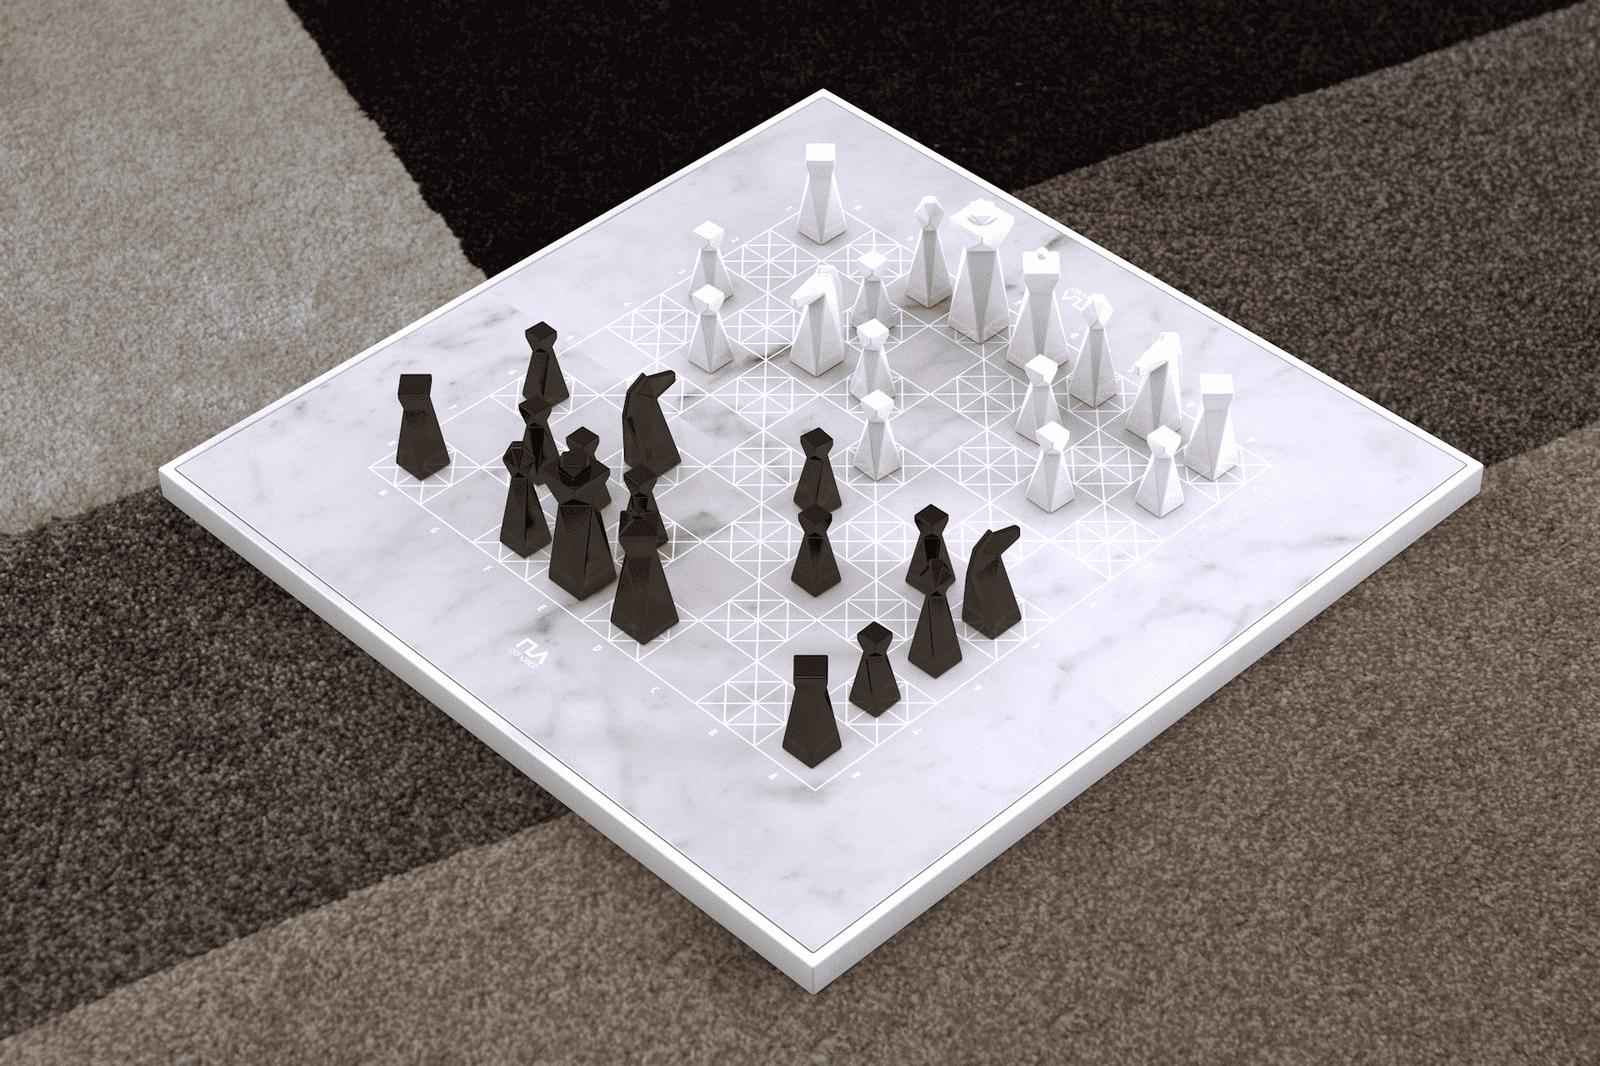 Luxury Chess Set Chess Set With Marble Pattern Chess Board 